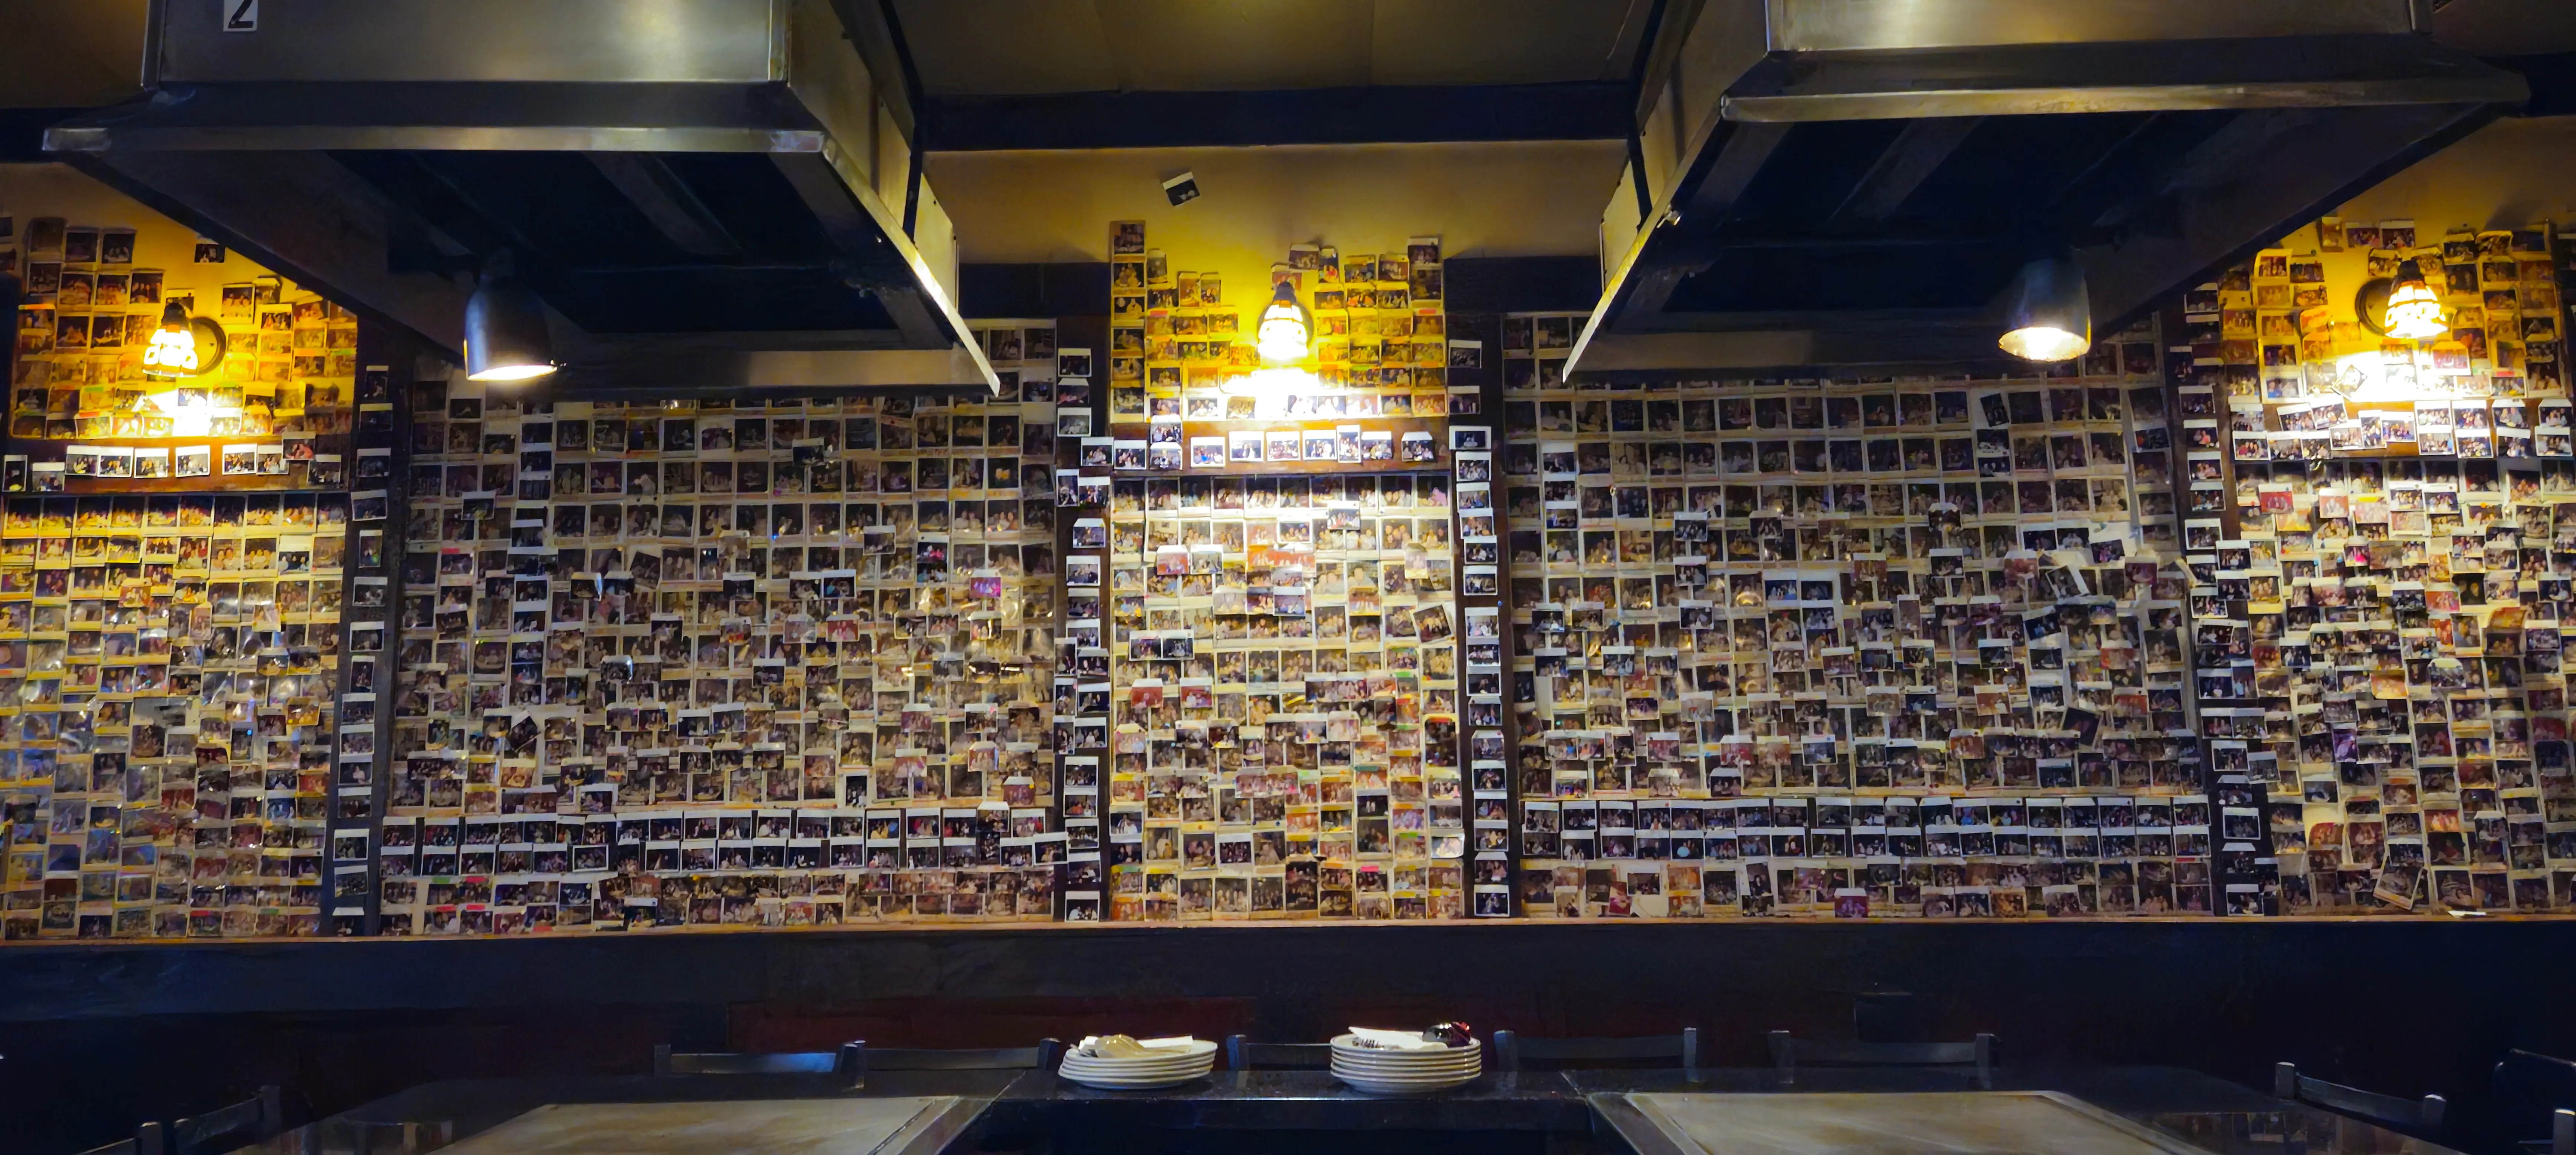 Display of polaroid pictures on the restaurant walls of past happy customers